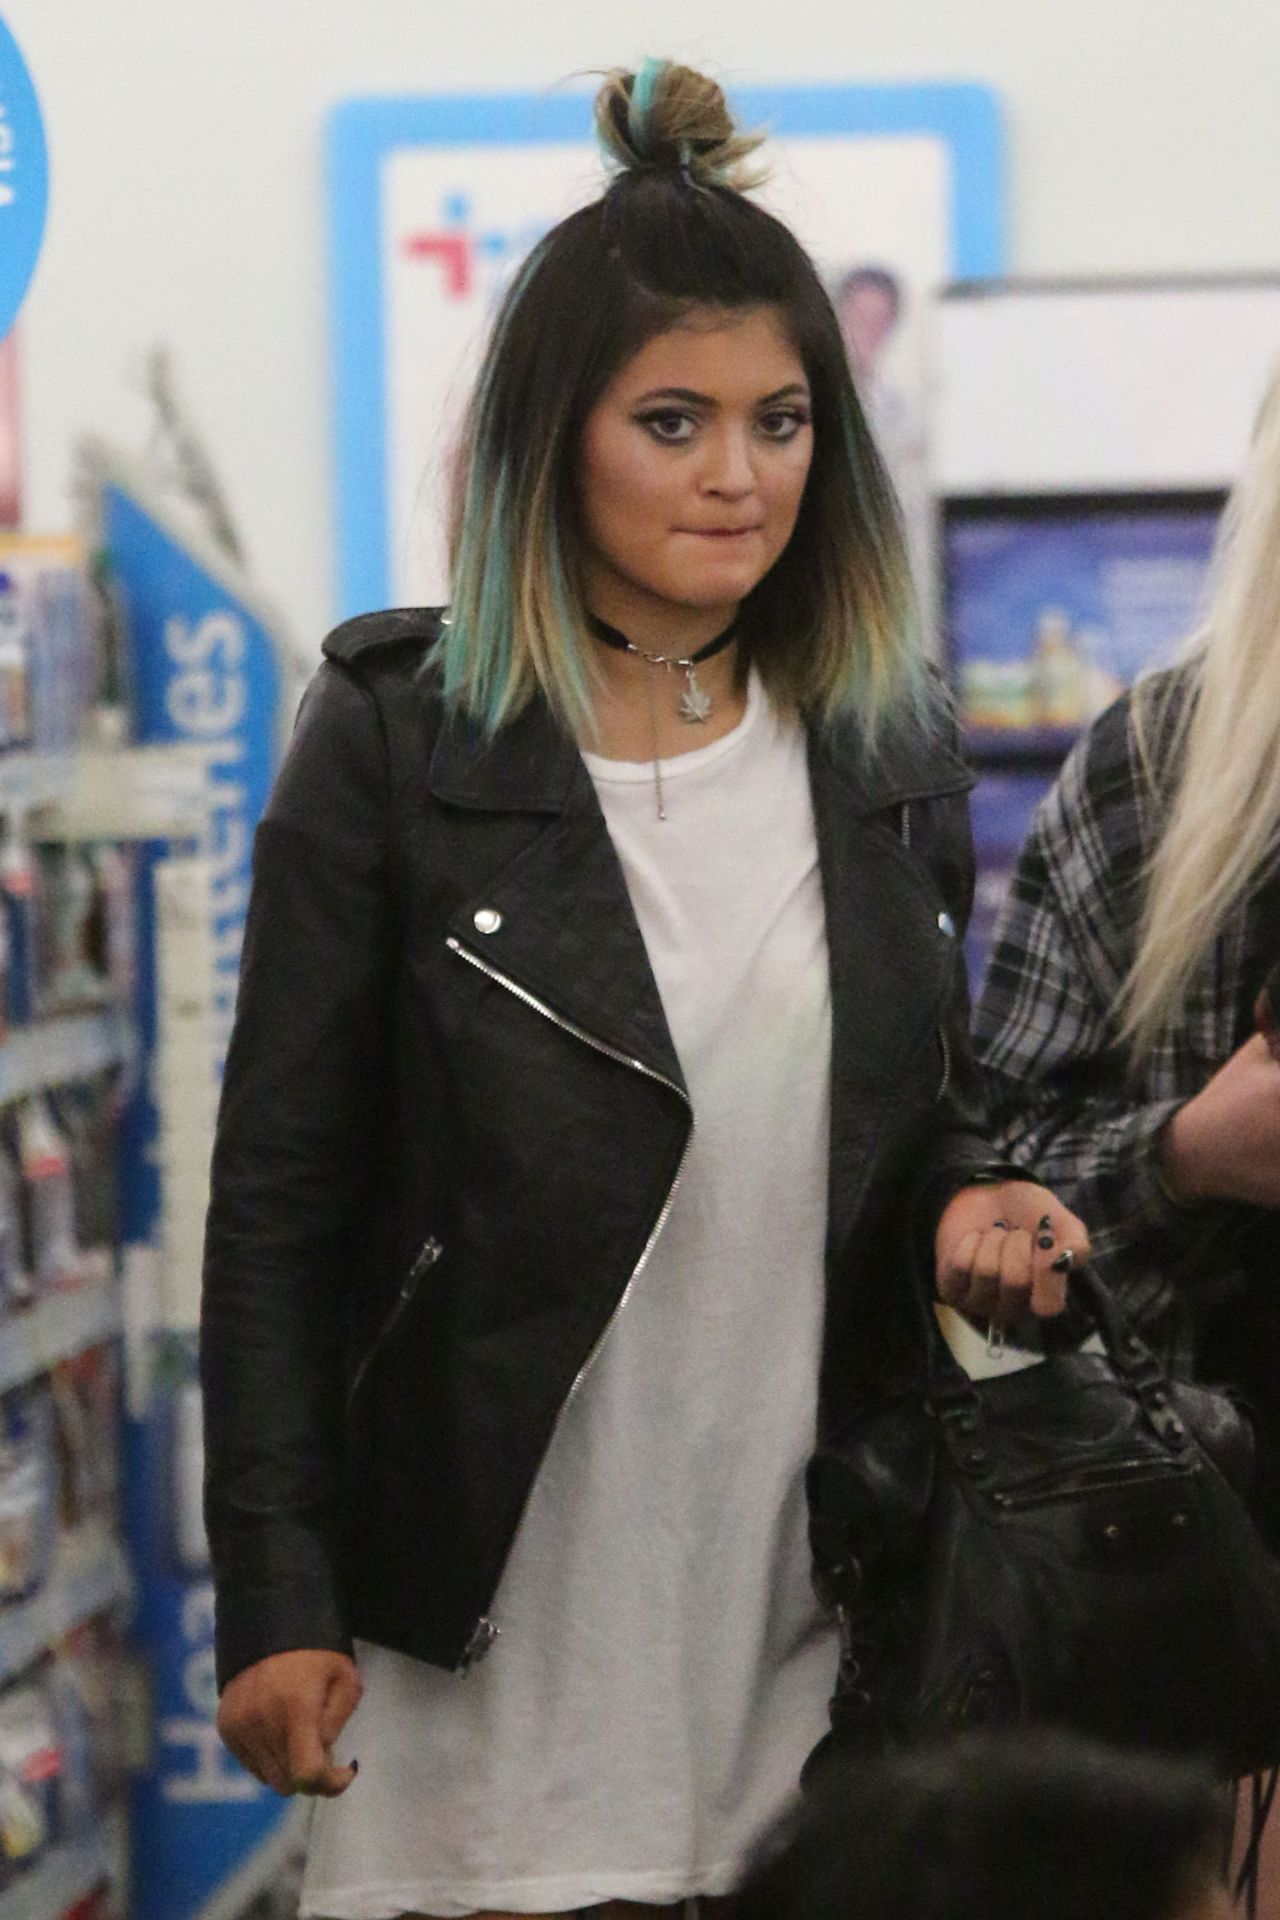 Kylie Jenner Street Style - Shopping in a Drug Store - May 2014 ...